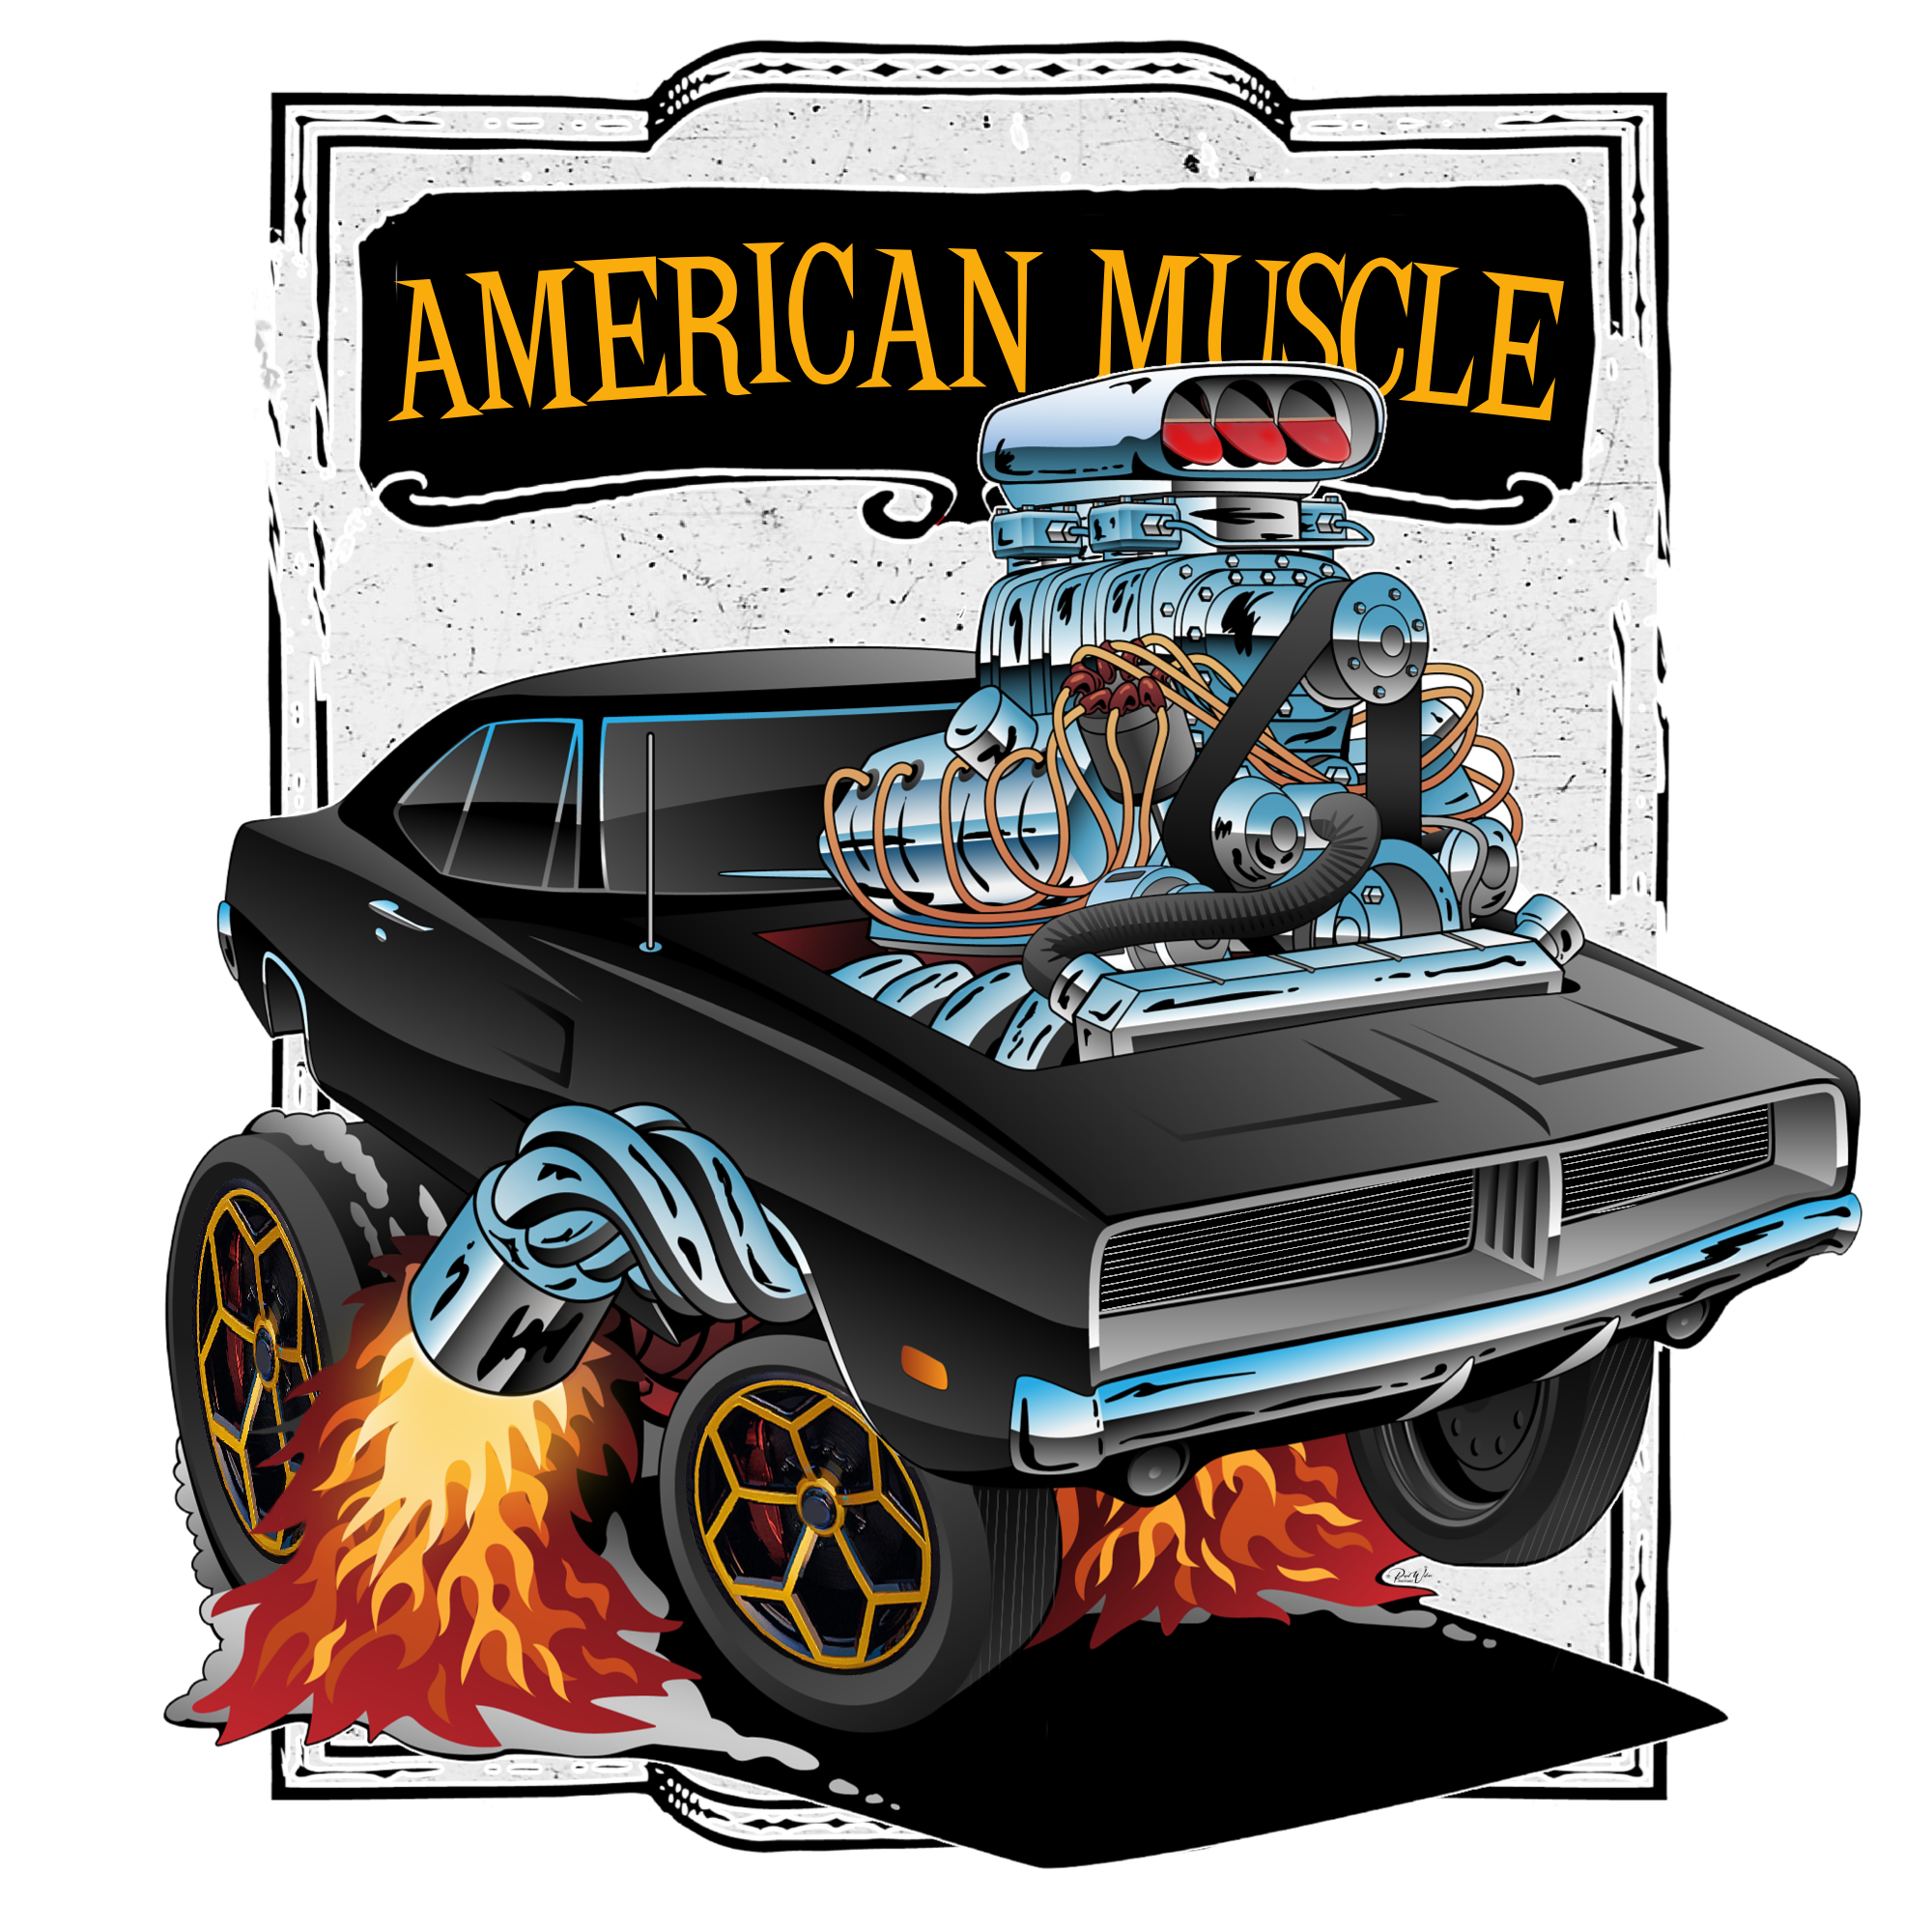 American Muscle Charger - Image